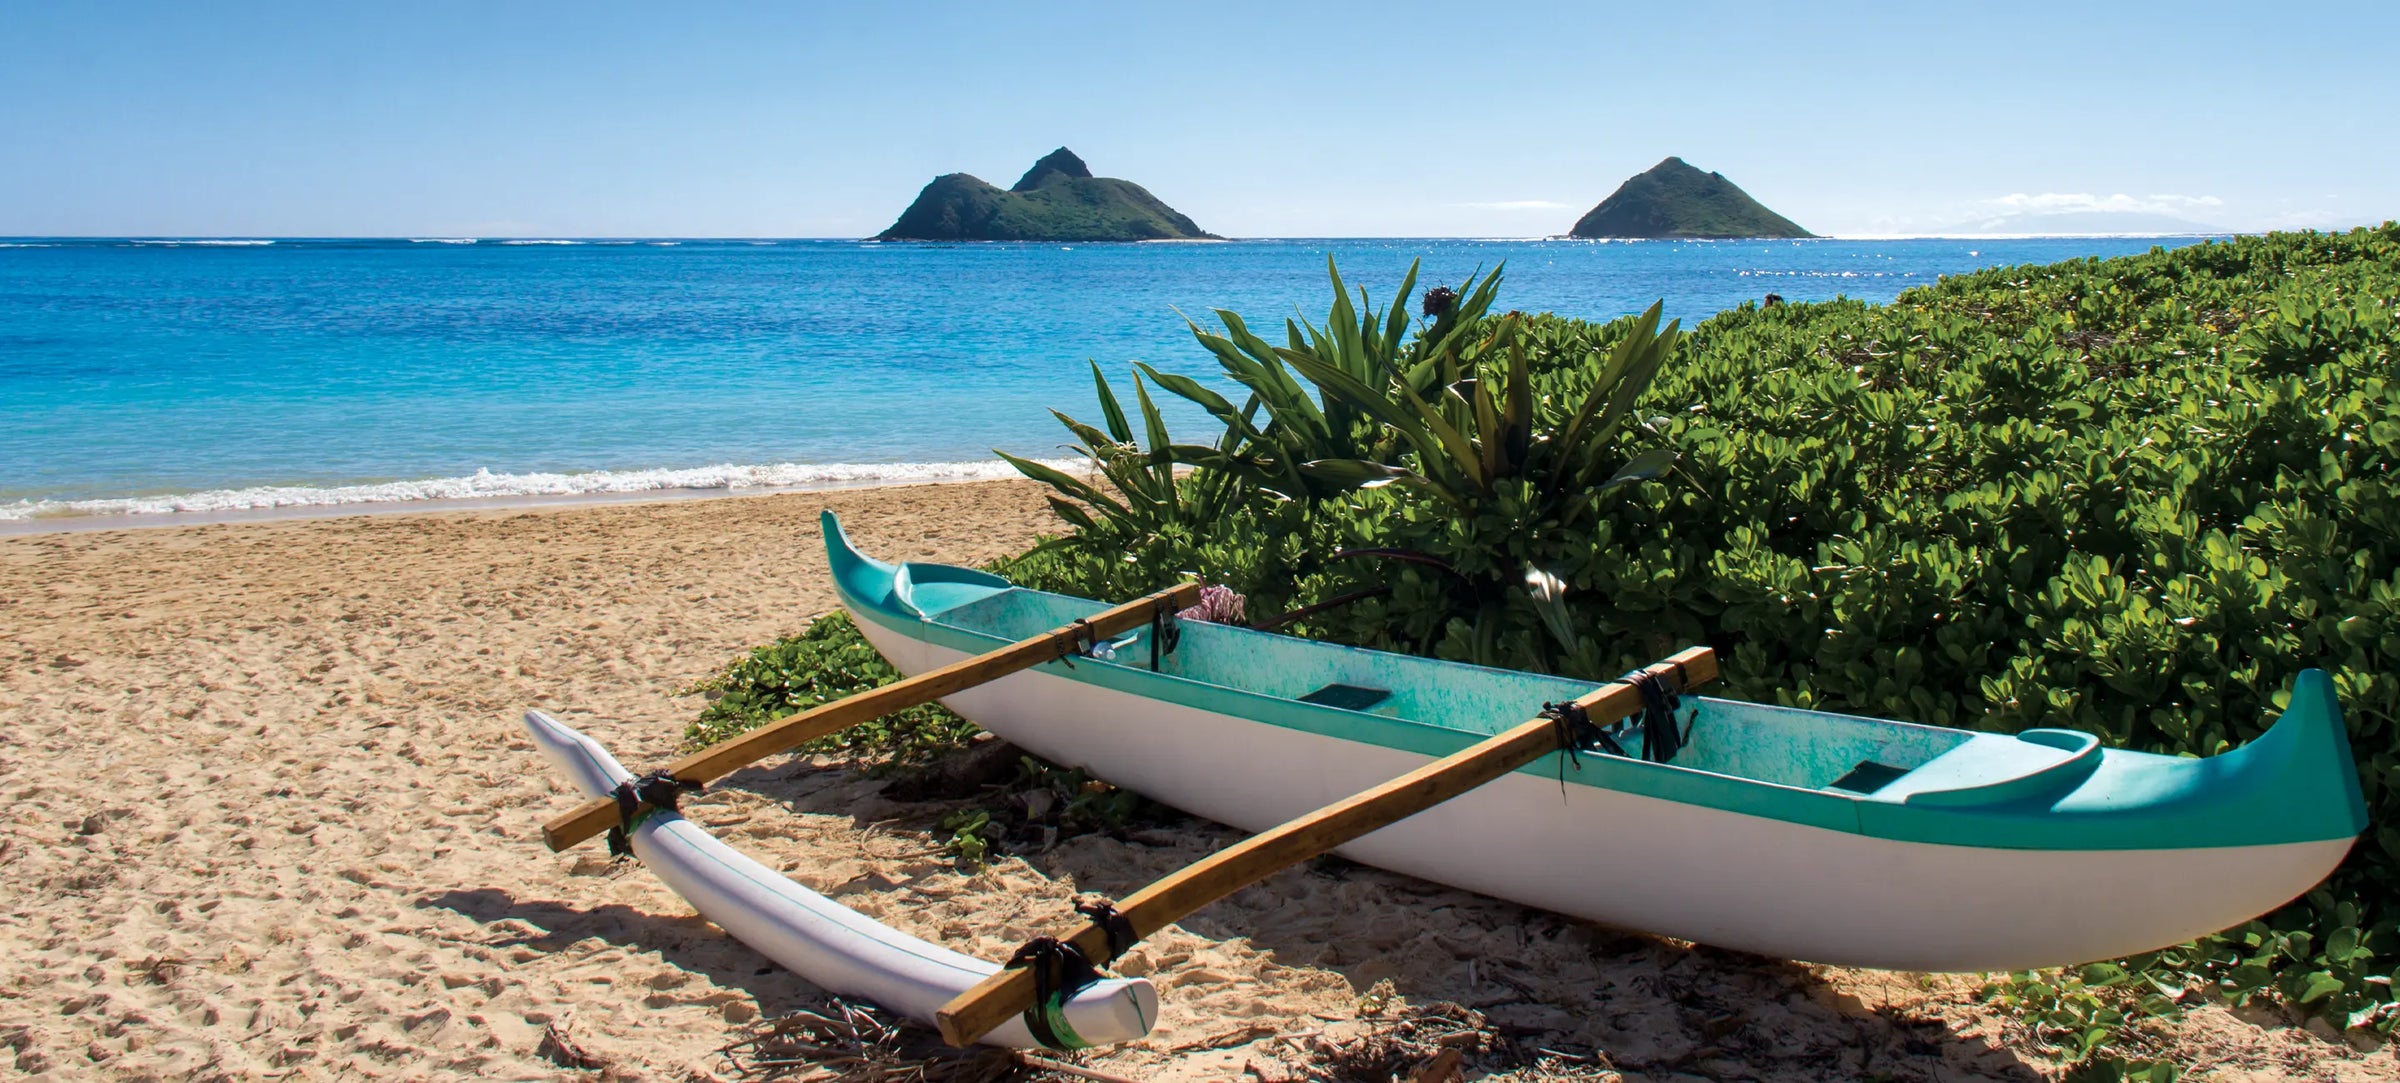 An outrigger canoe sits on Lanikai Beach with the Mokulua Islands in the background